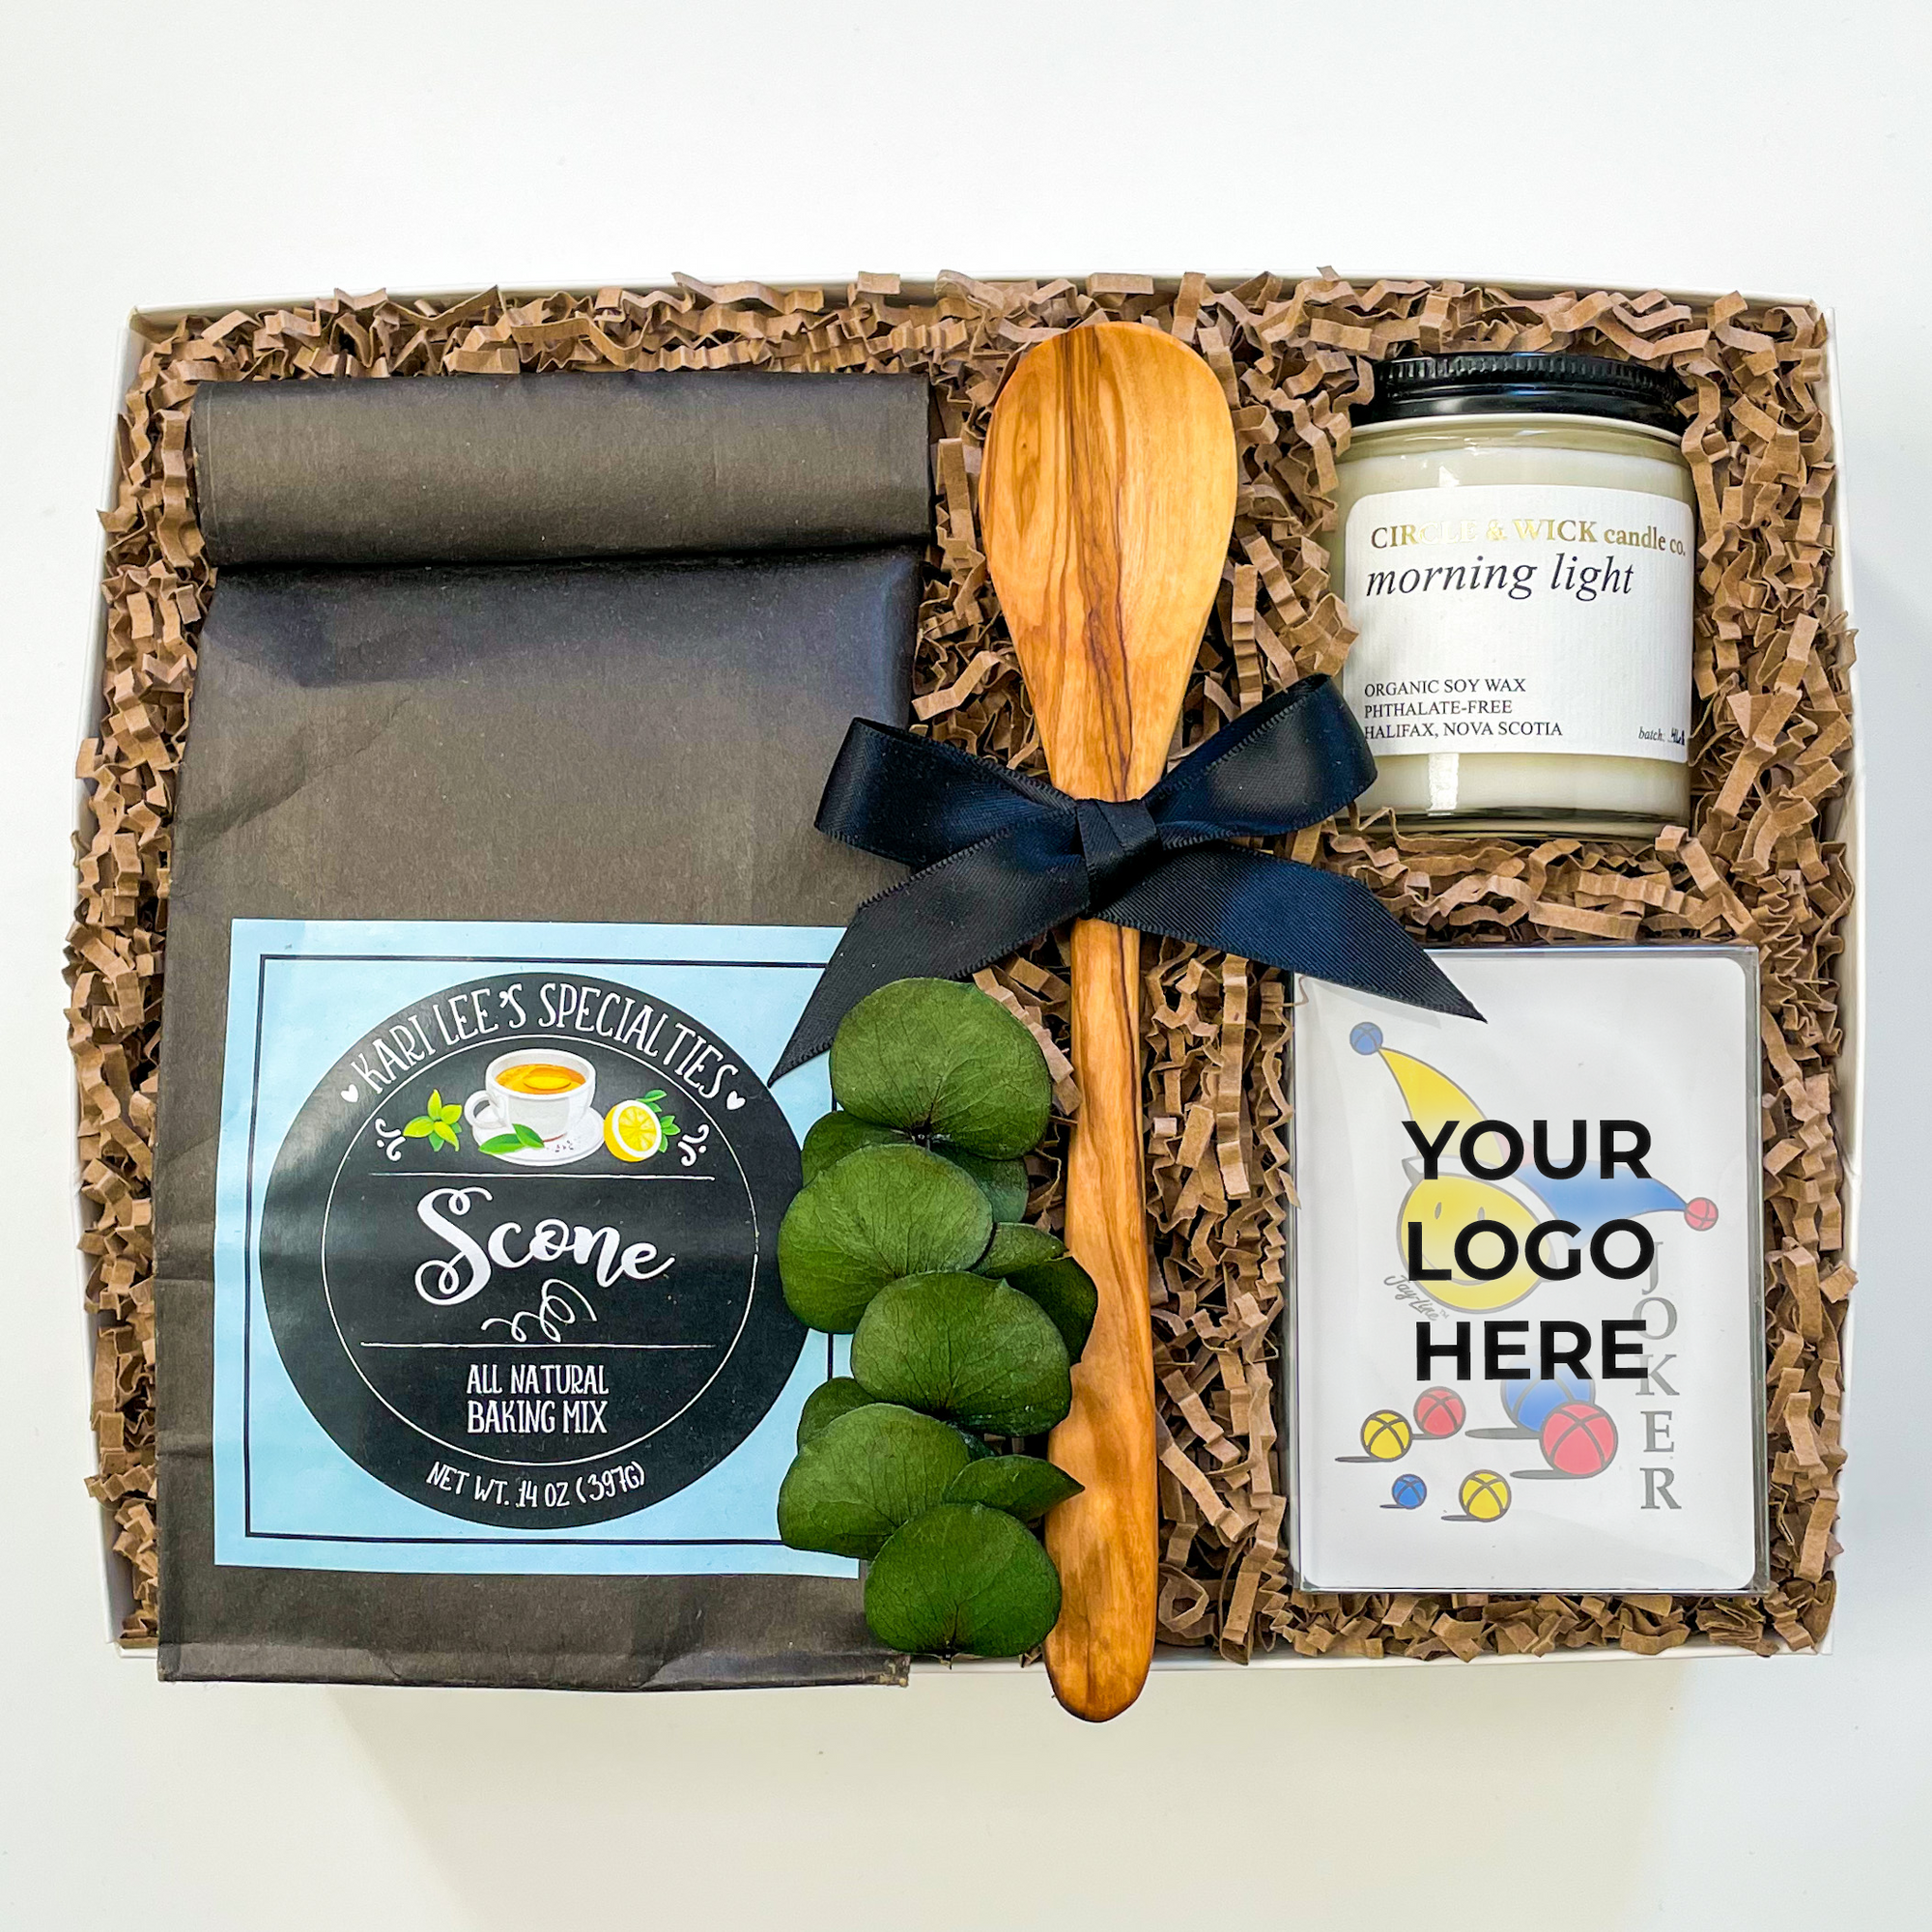 6 Essential Tips When Sending a Corporate Gift - The Fountain Gifts Blog